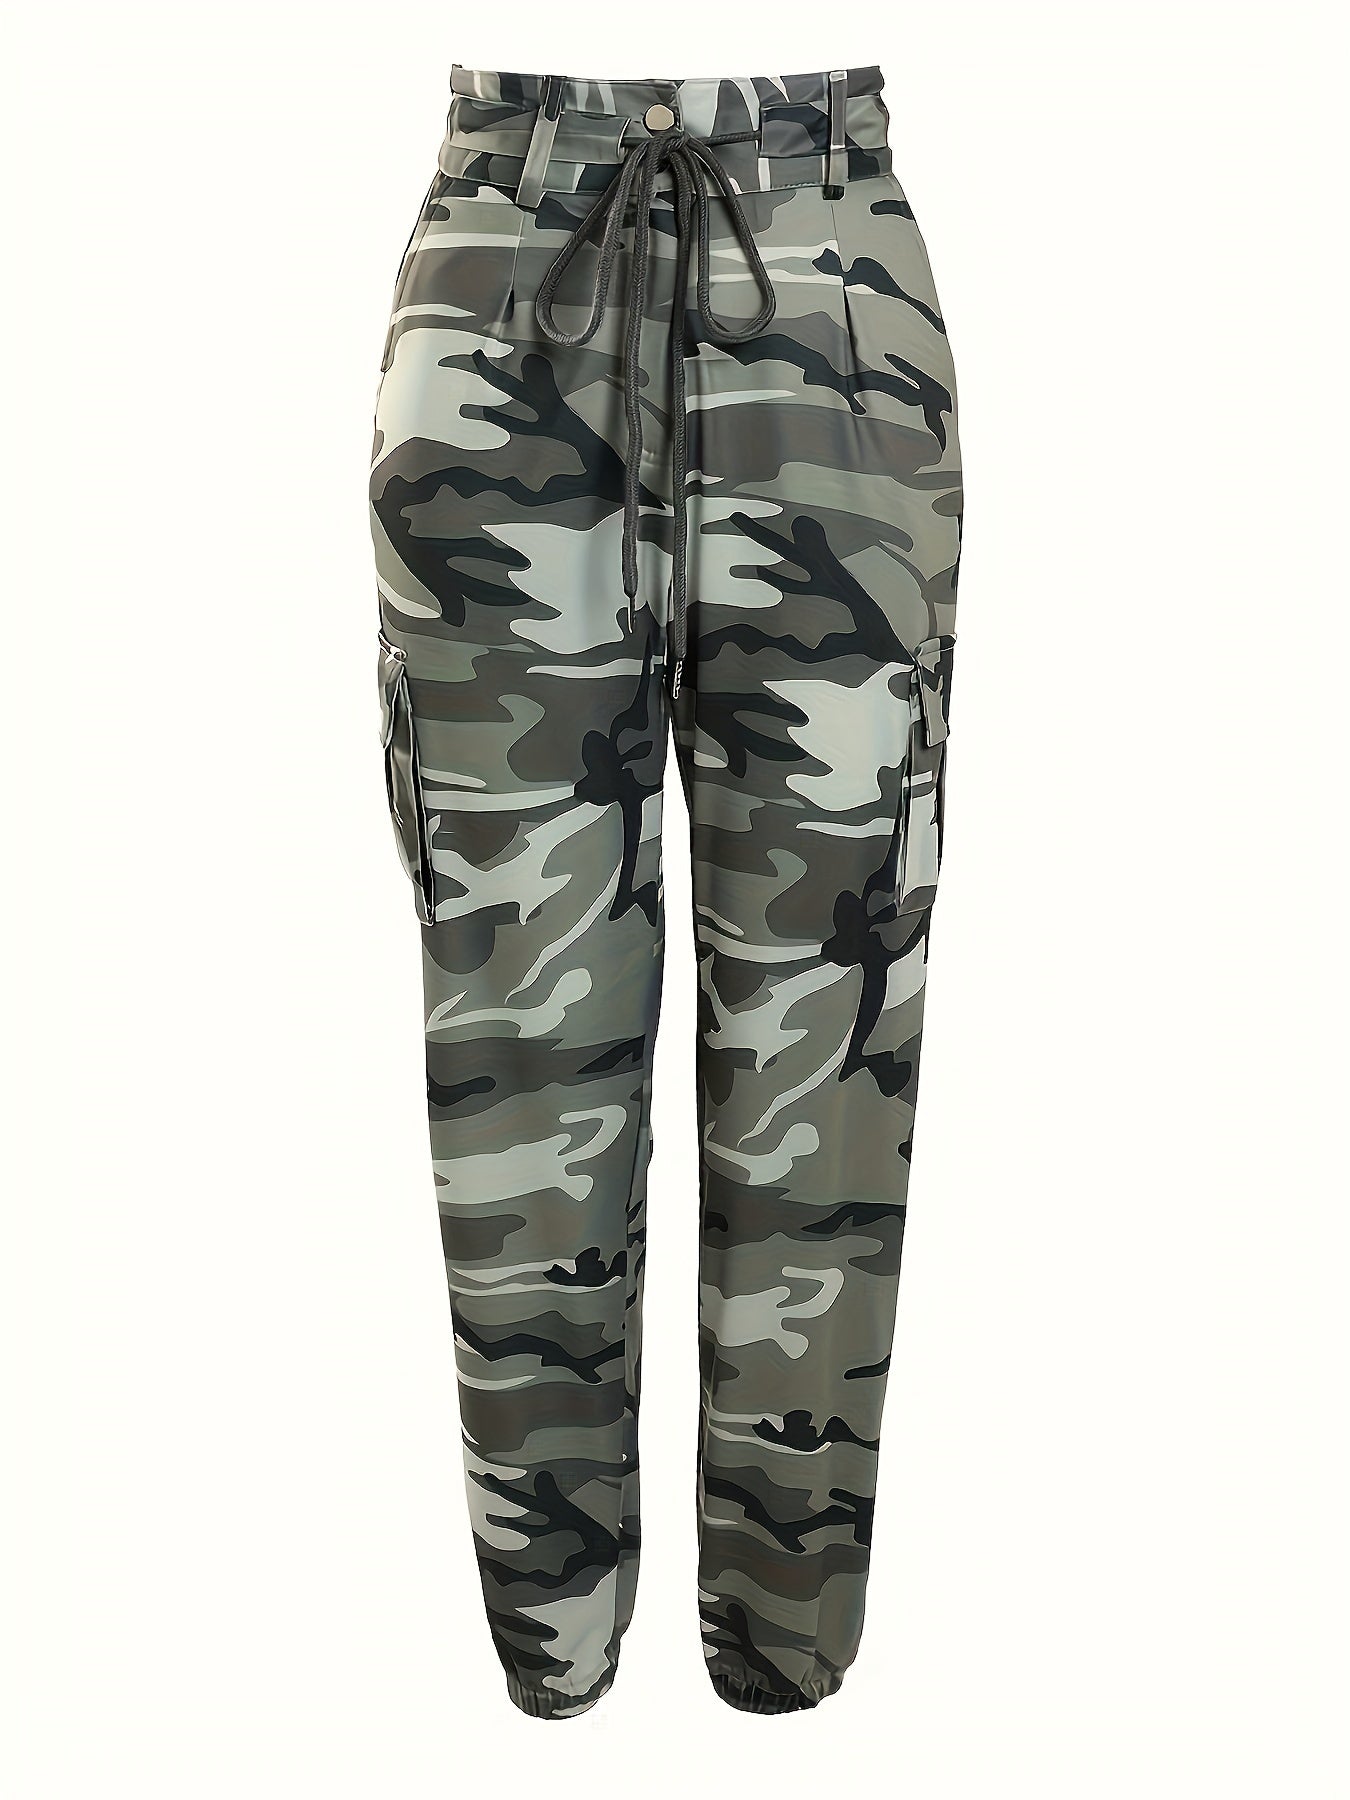 Camo Print Drawstring Baggy Joggers, Casual Hiogh Waist Pants For Spring & Fall, Women's Clothing